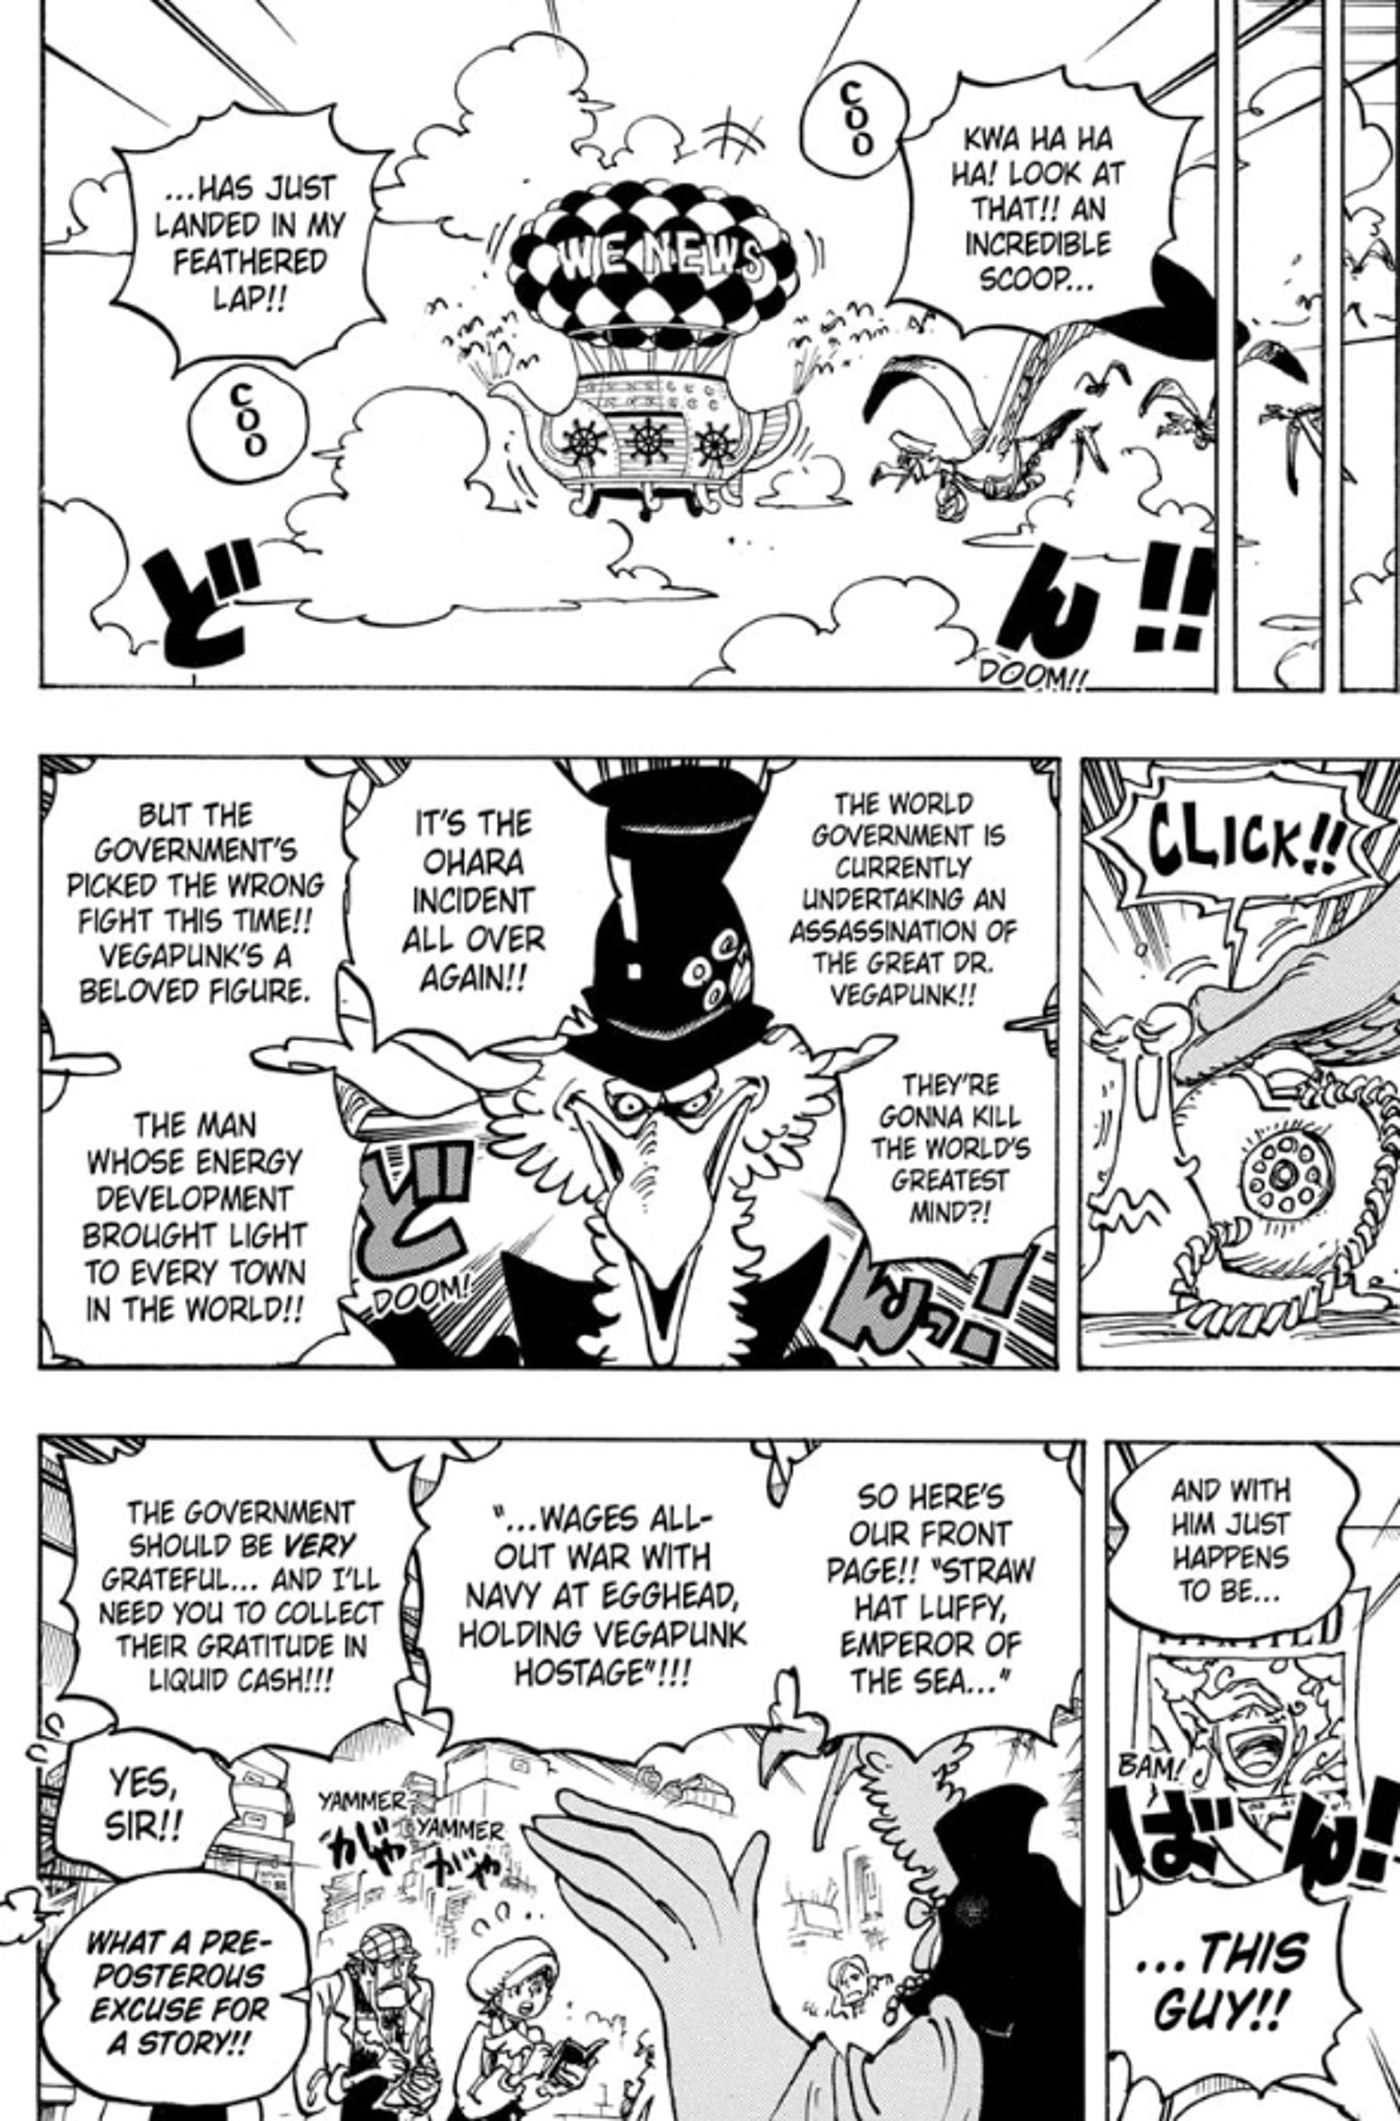 big news morgans talks about the world government and vegapunk in one piece